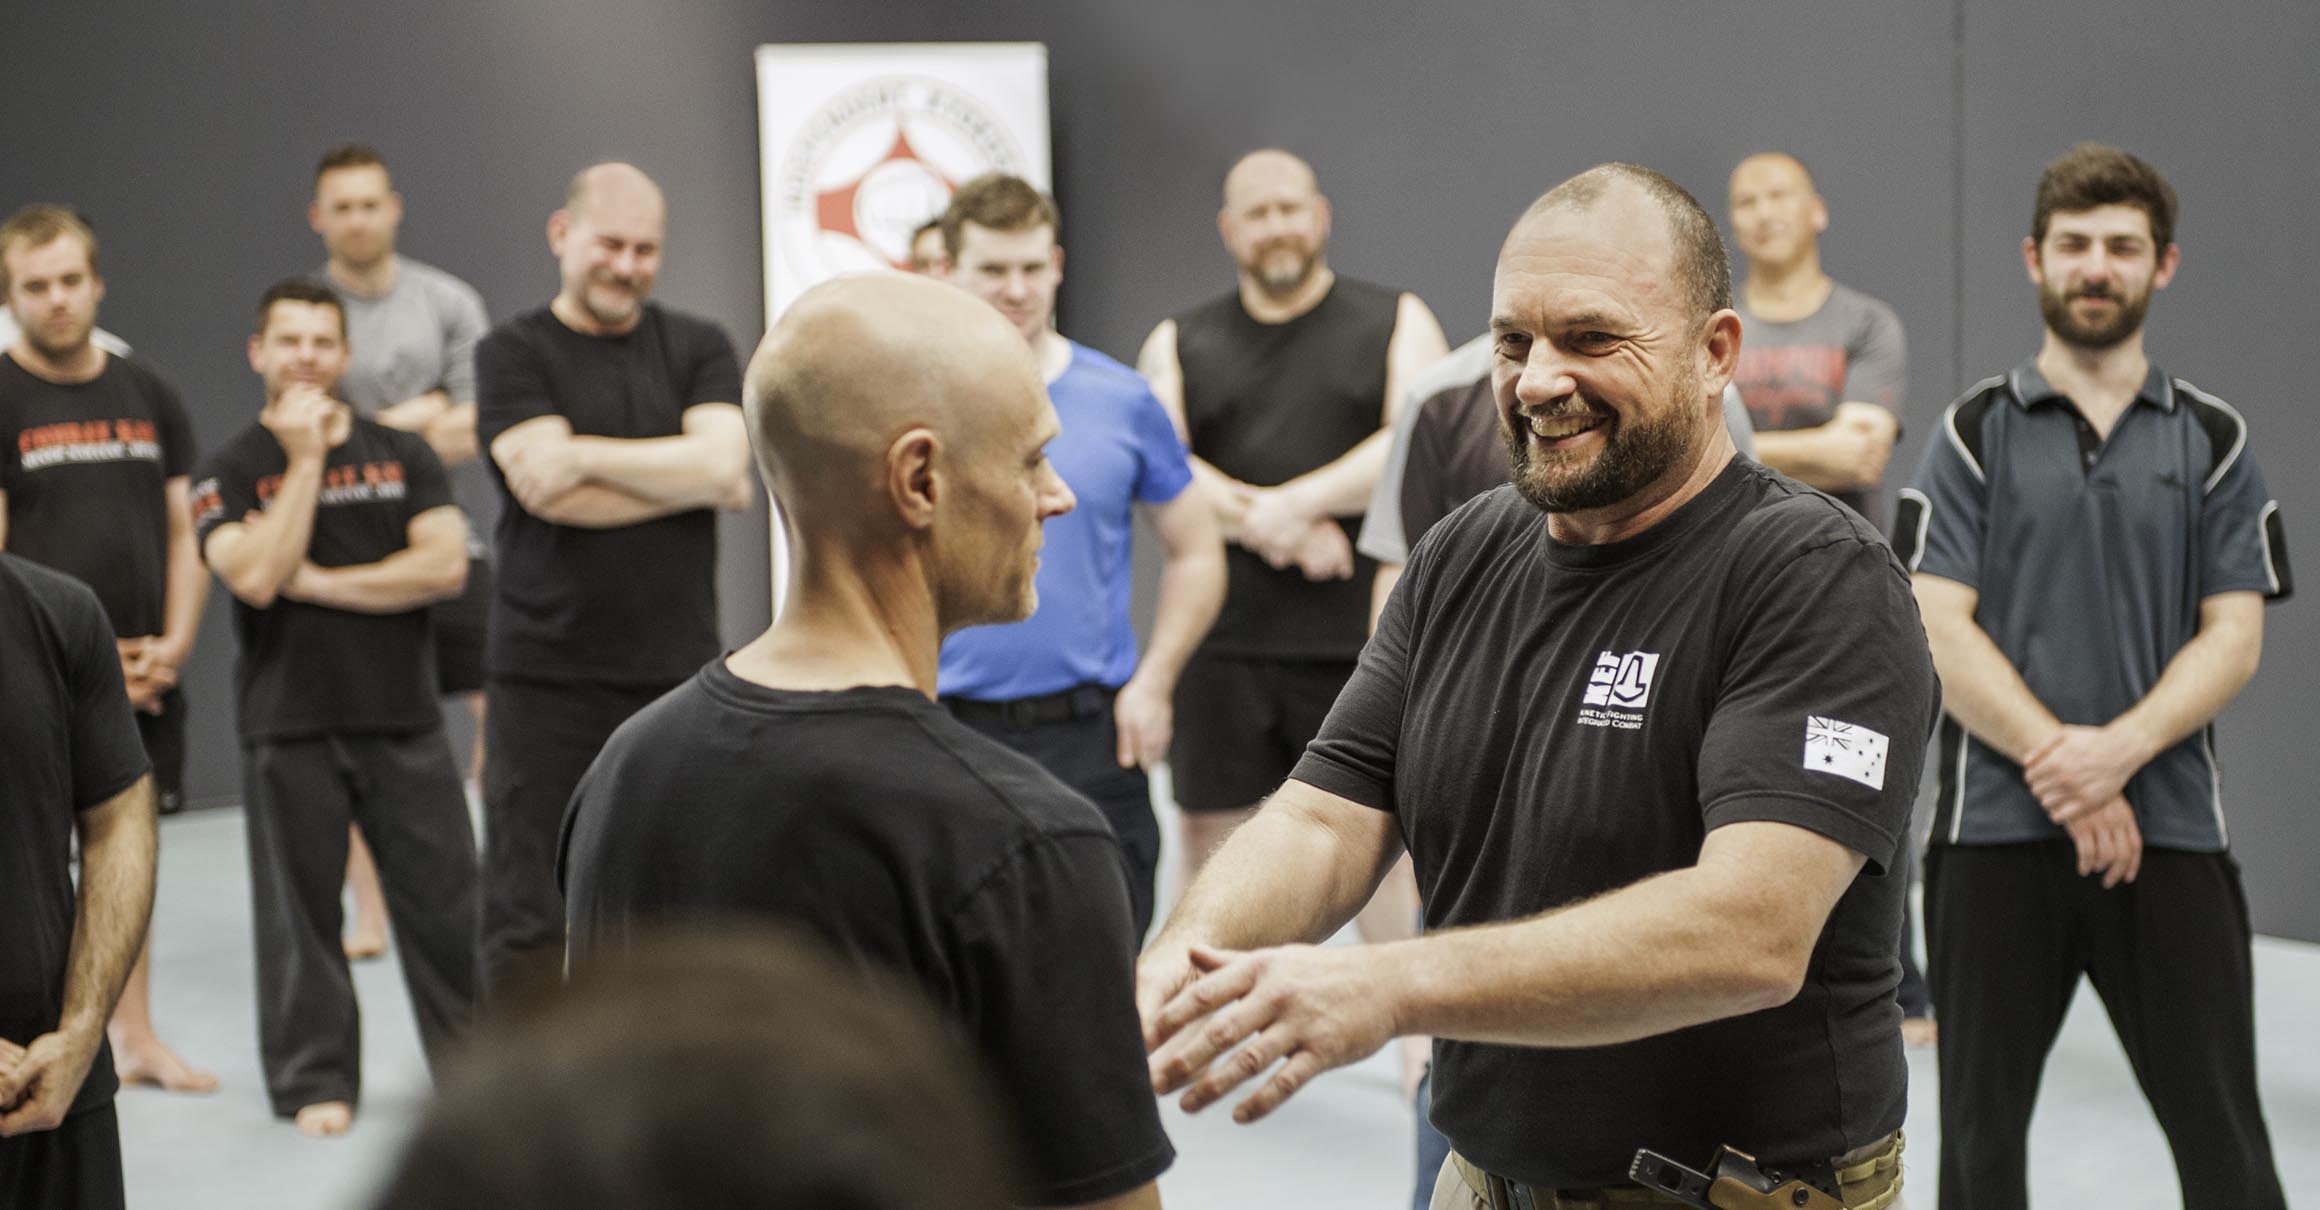 Paul Cale Kinetic Fighting Level 1 course